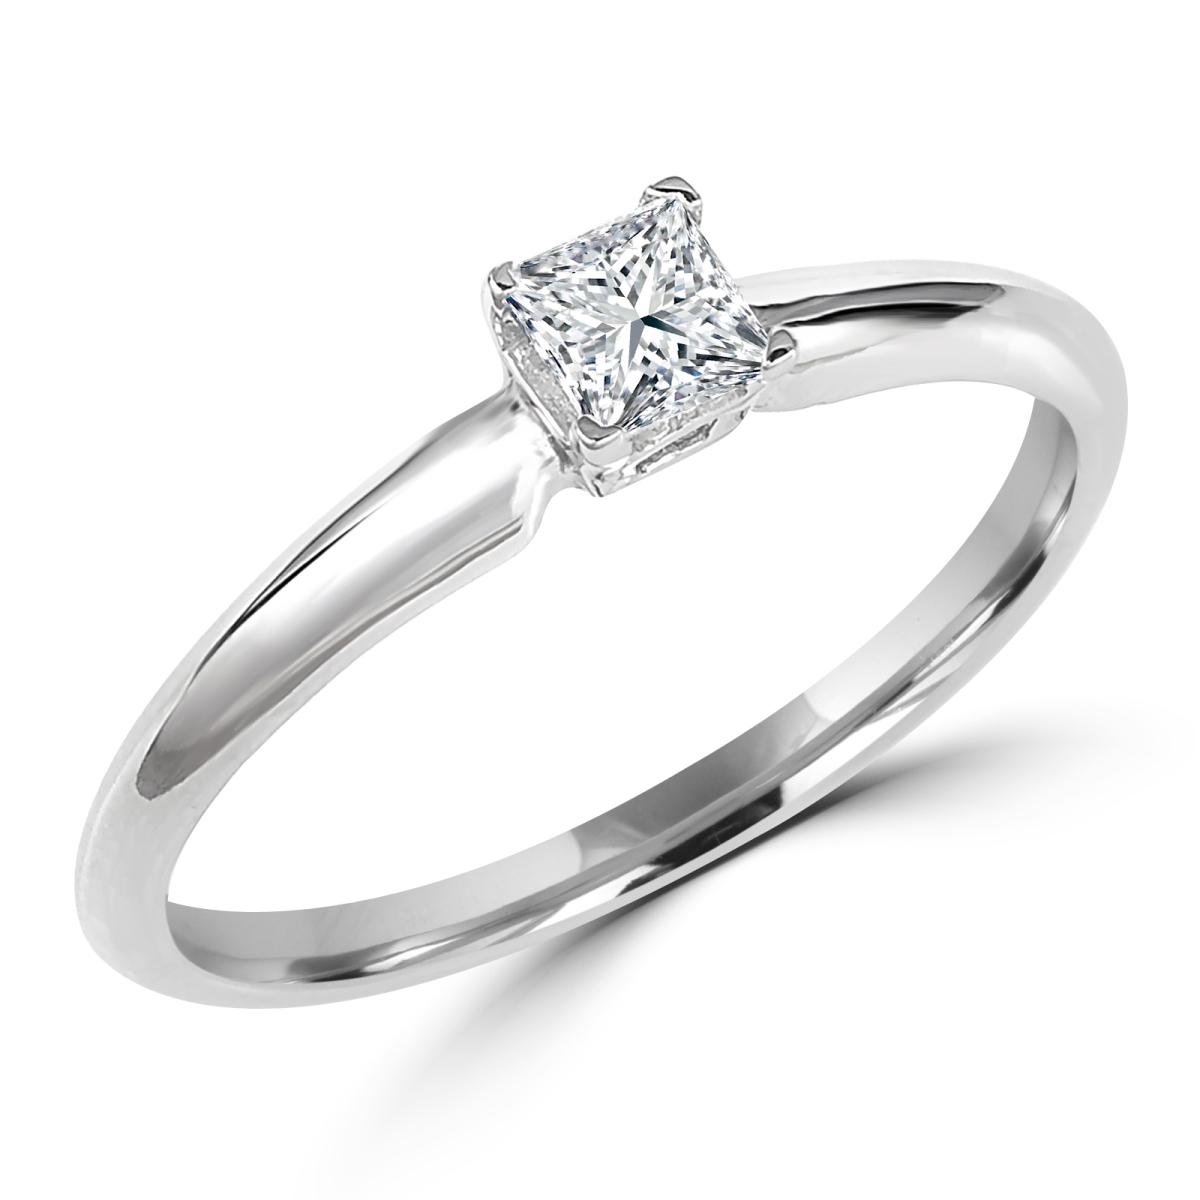 Picture of Majesty Diamonds MD170184 0.2 CT Princess Diamond Solitaire Engagement Ring in 10K